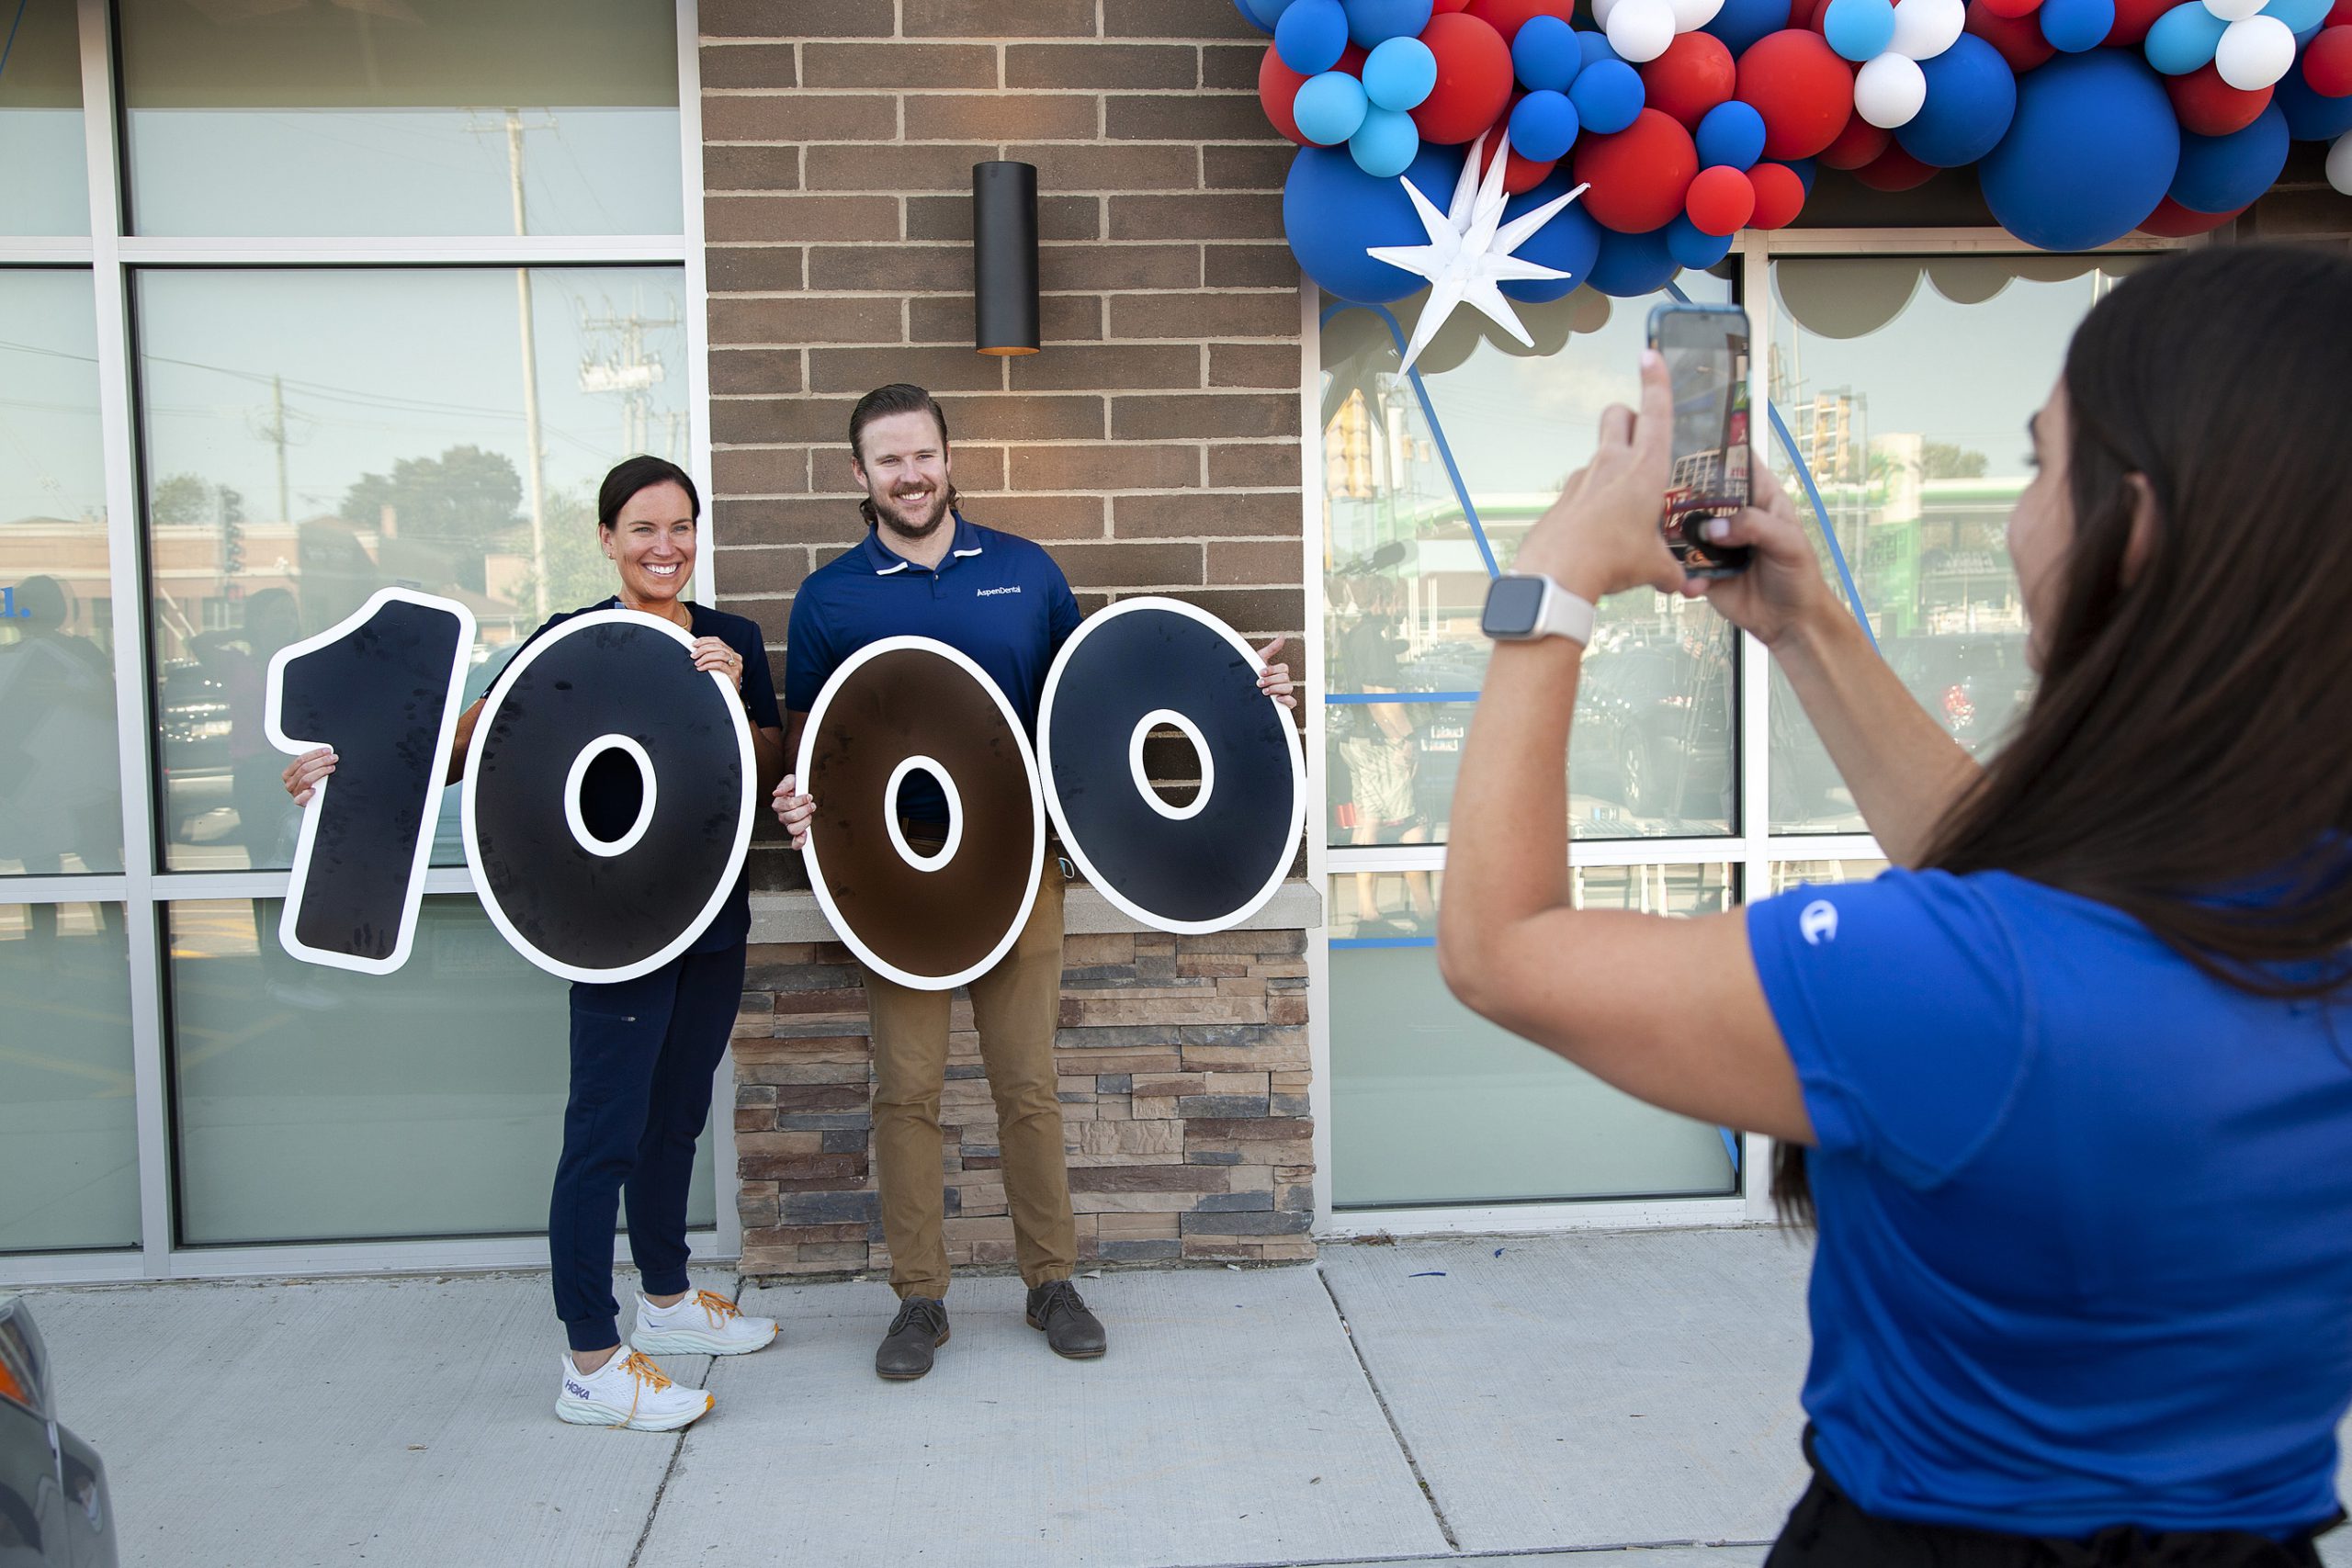 The Aspen Group Celebrates the Opening of the 1000th Aspen Dental Office